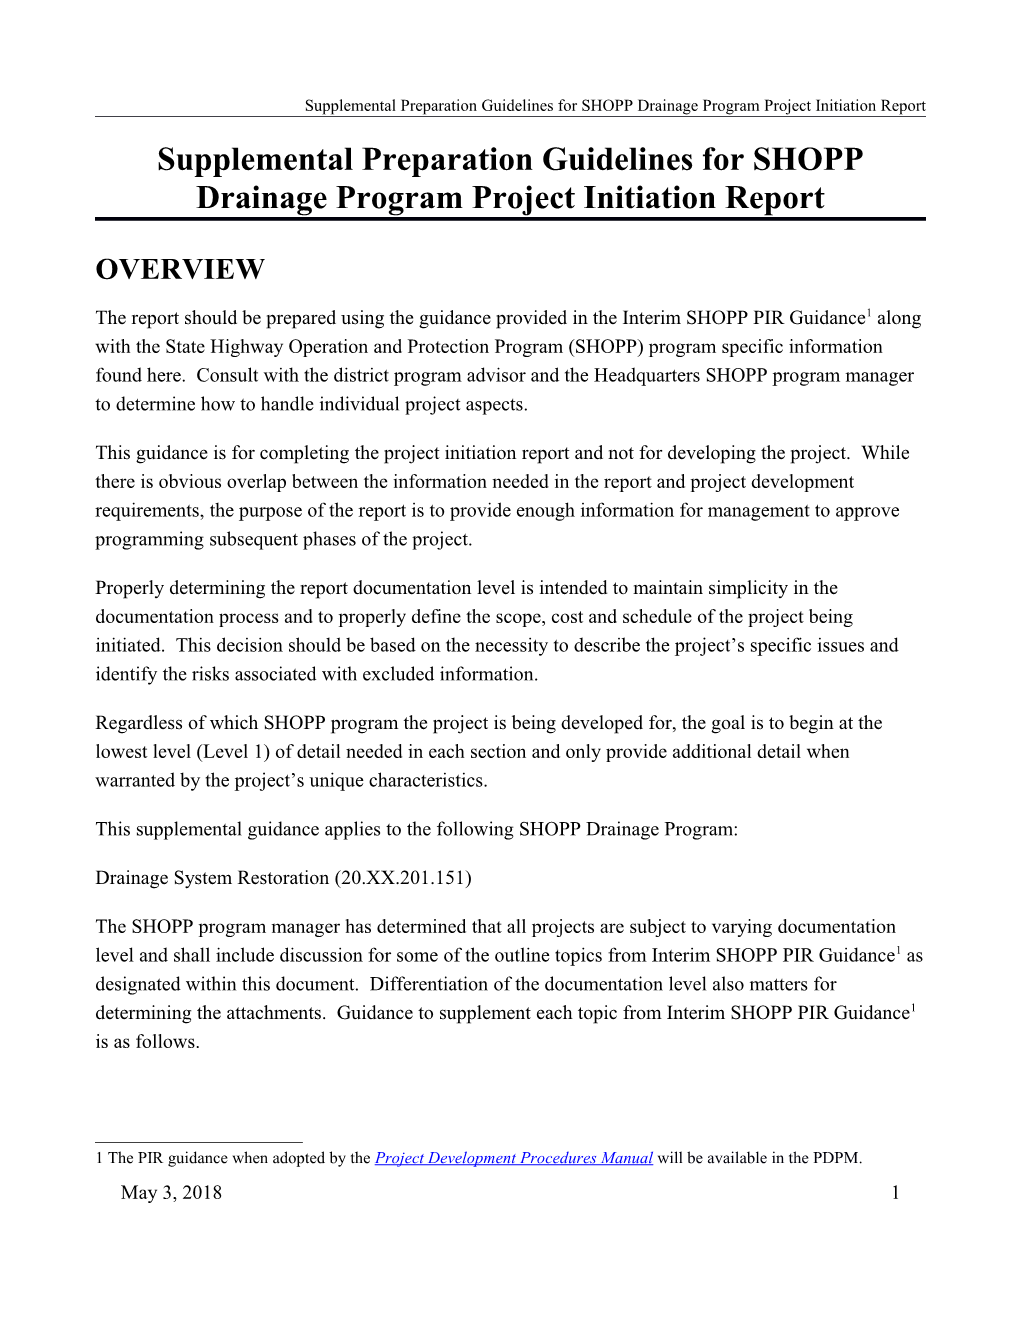 Supplemental Preparation Guidelines for SHOPP Drainage Program Project Initiation Report